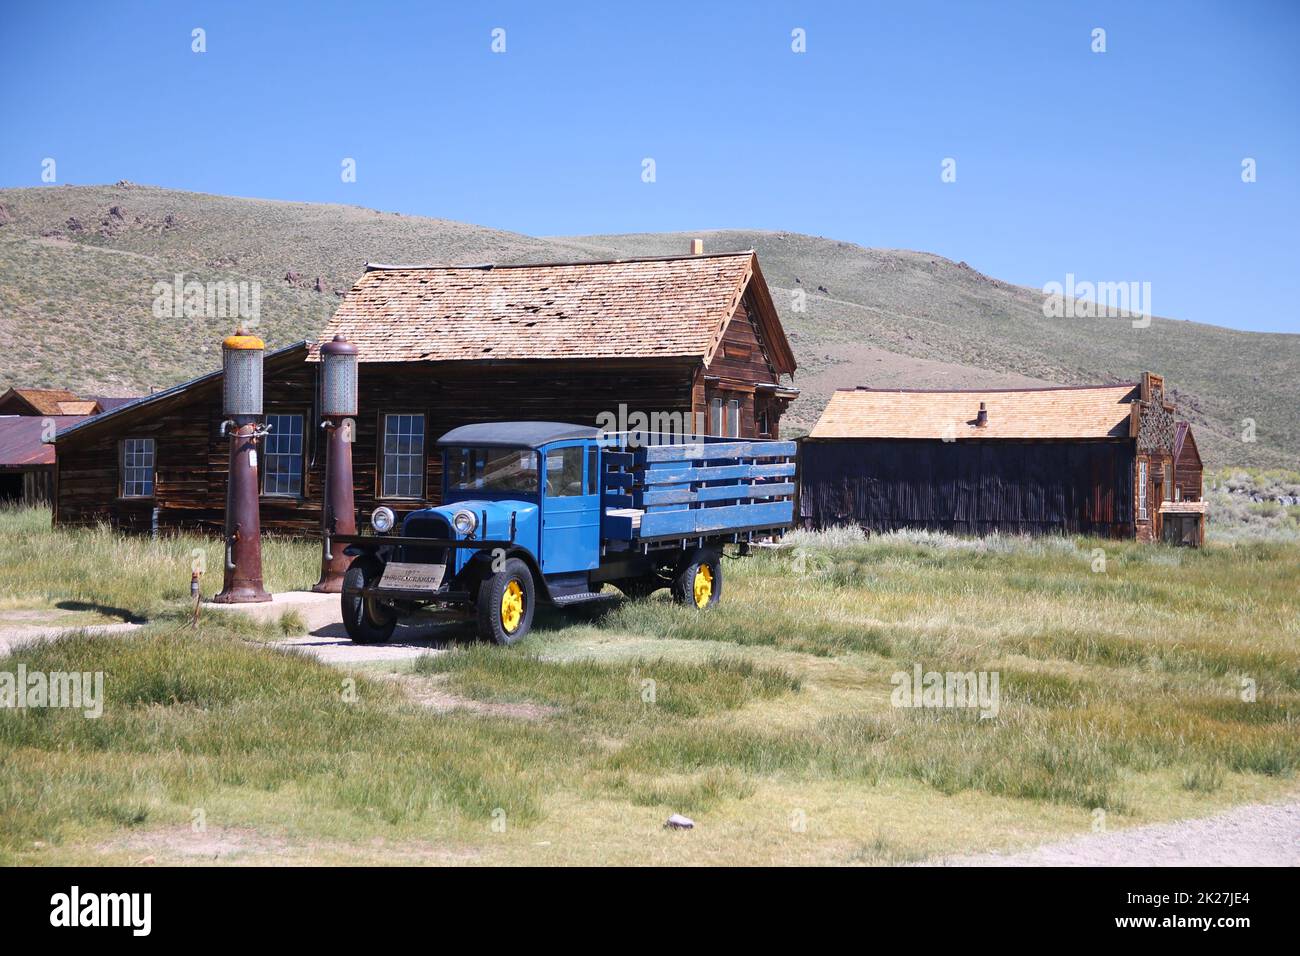 The abandoned gas station and blue truck of the Bodie ghost town in the desert Stock Photo